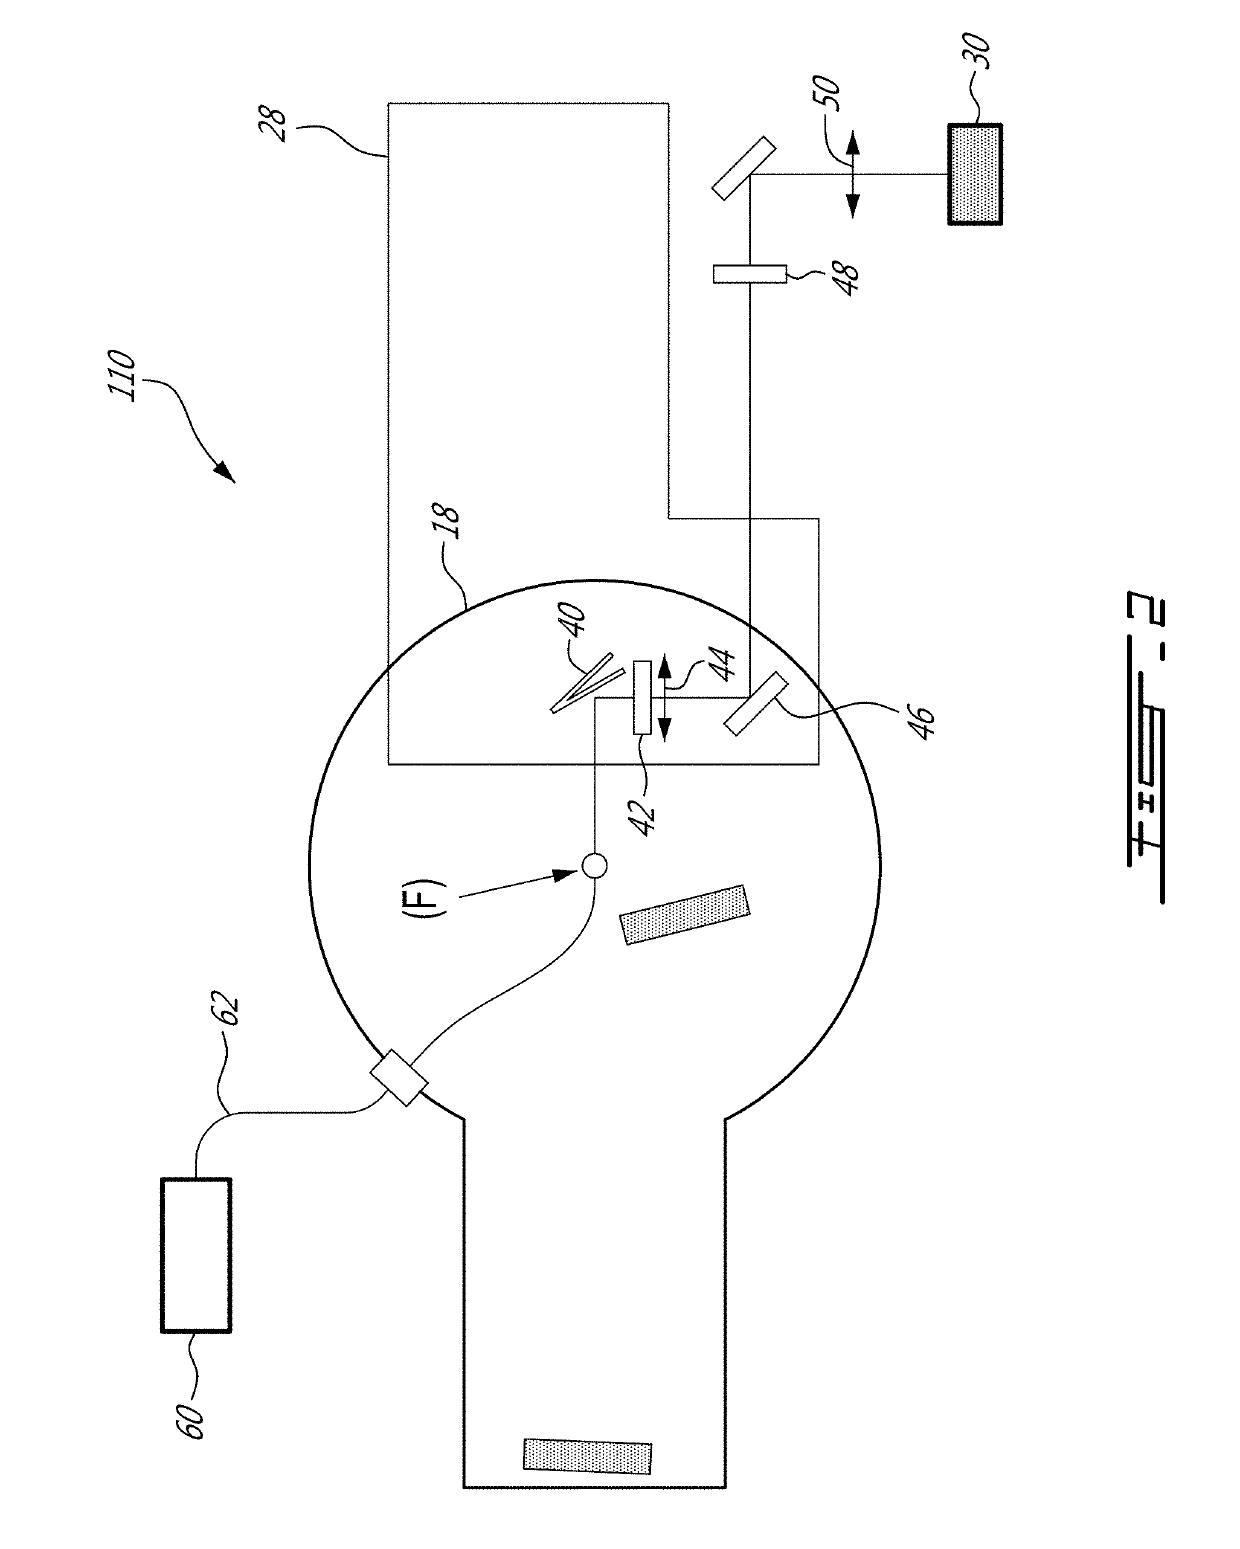 System and method for correcting laser beam wavefront of high power laser systems